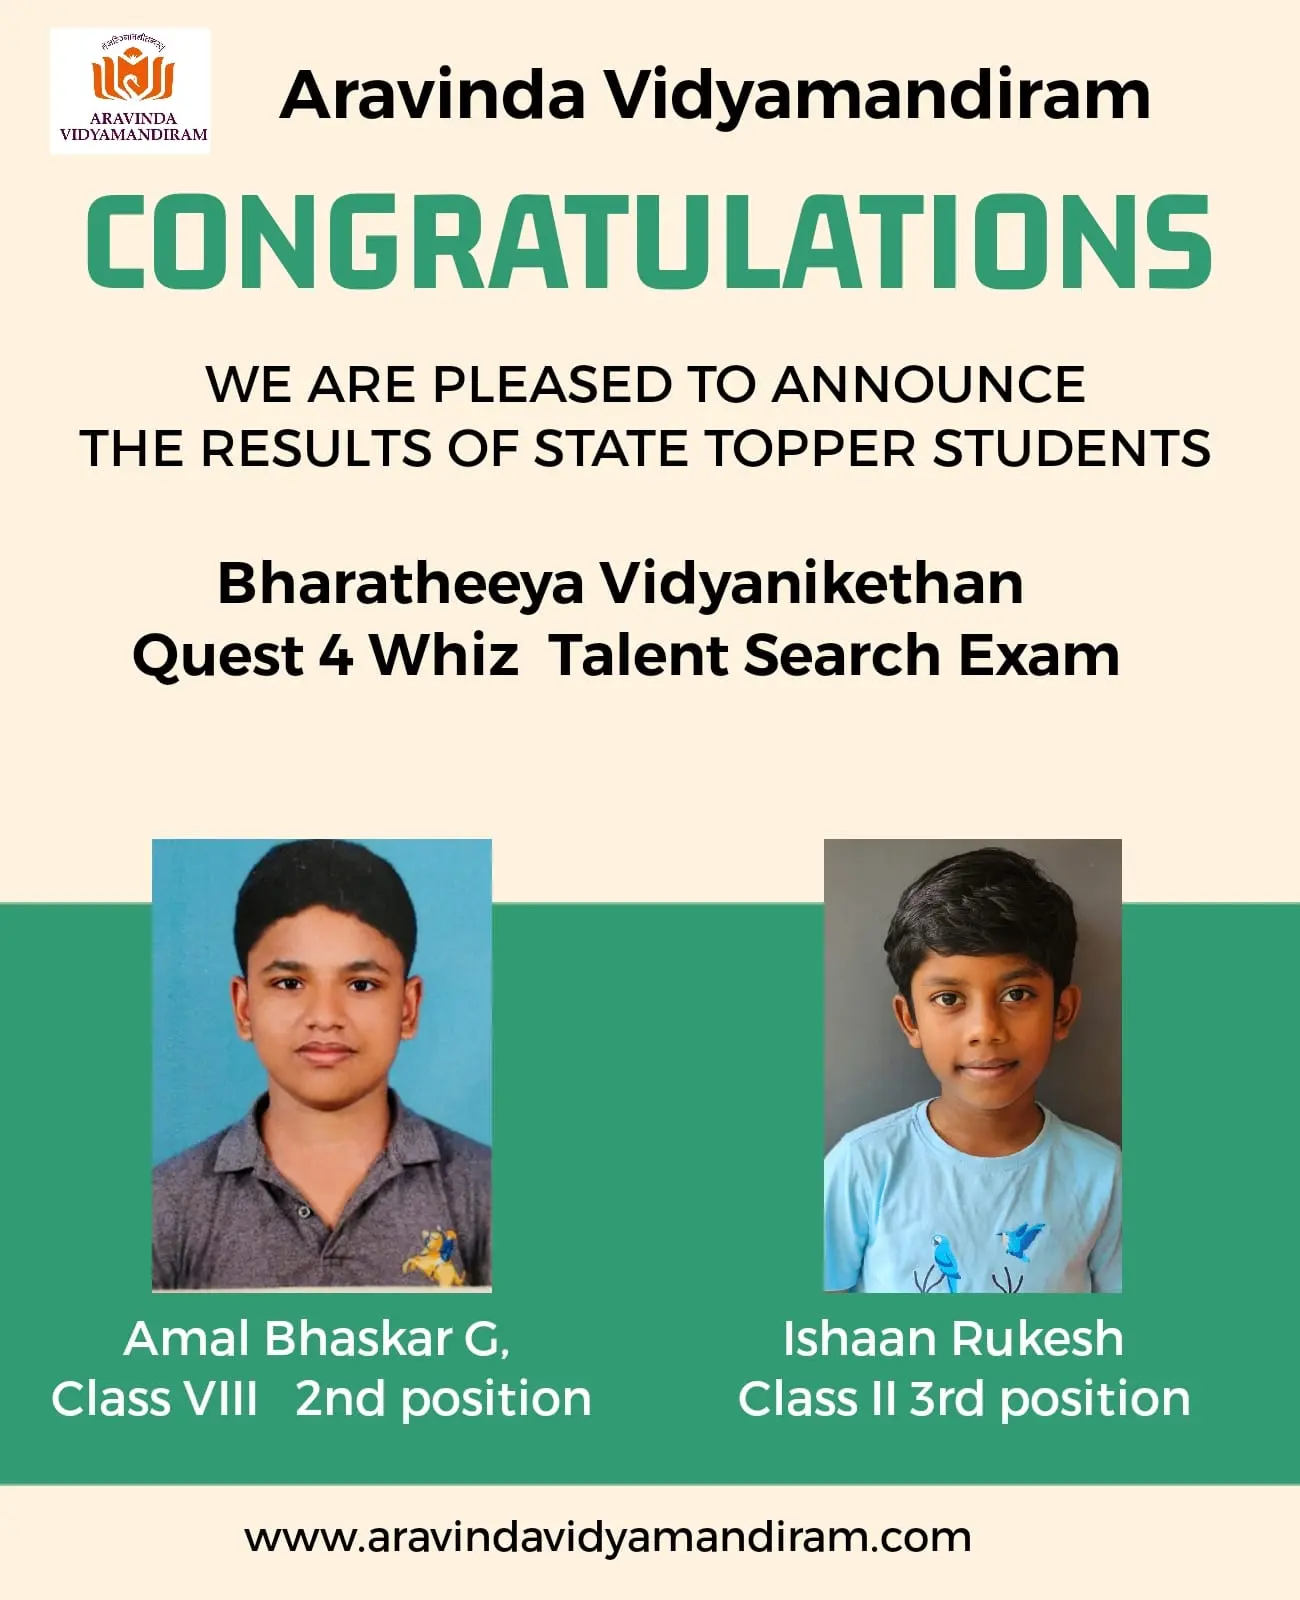 Hearty Congratulations to Our Students Who achieve Quest 4 Whiz Talent Search Exam